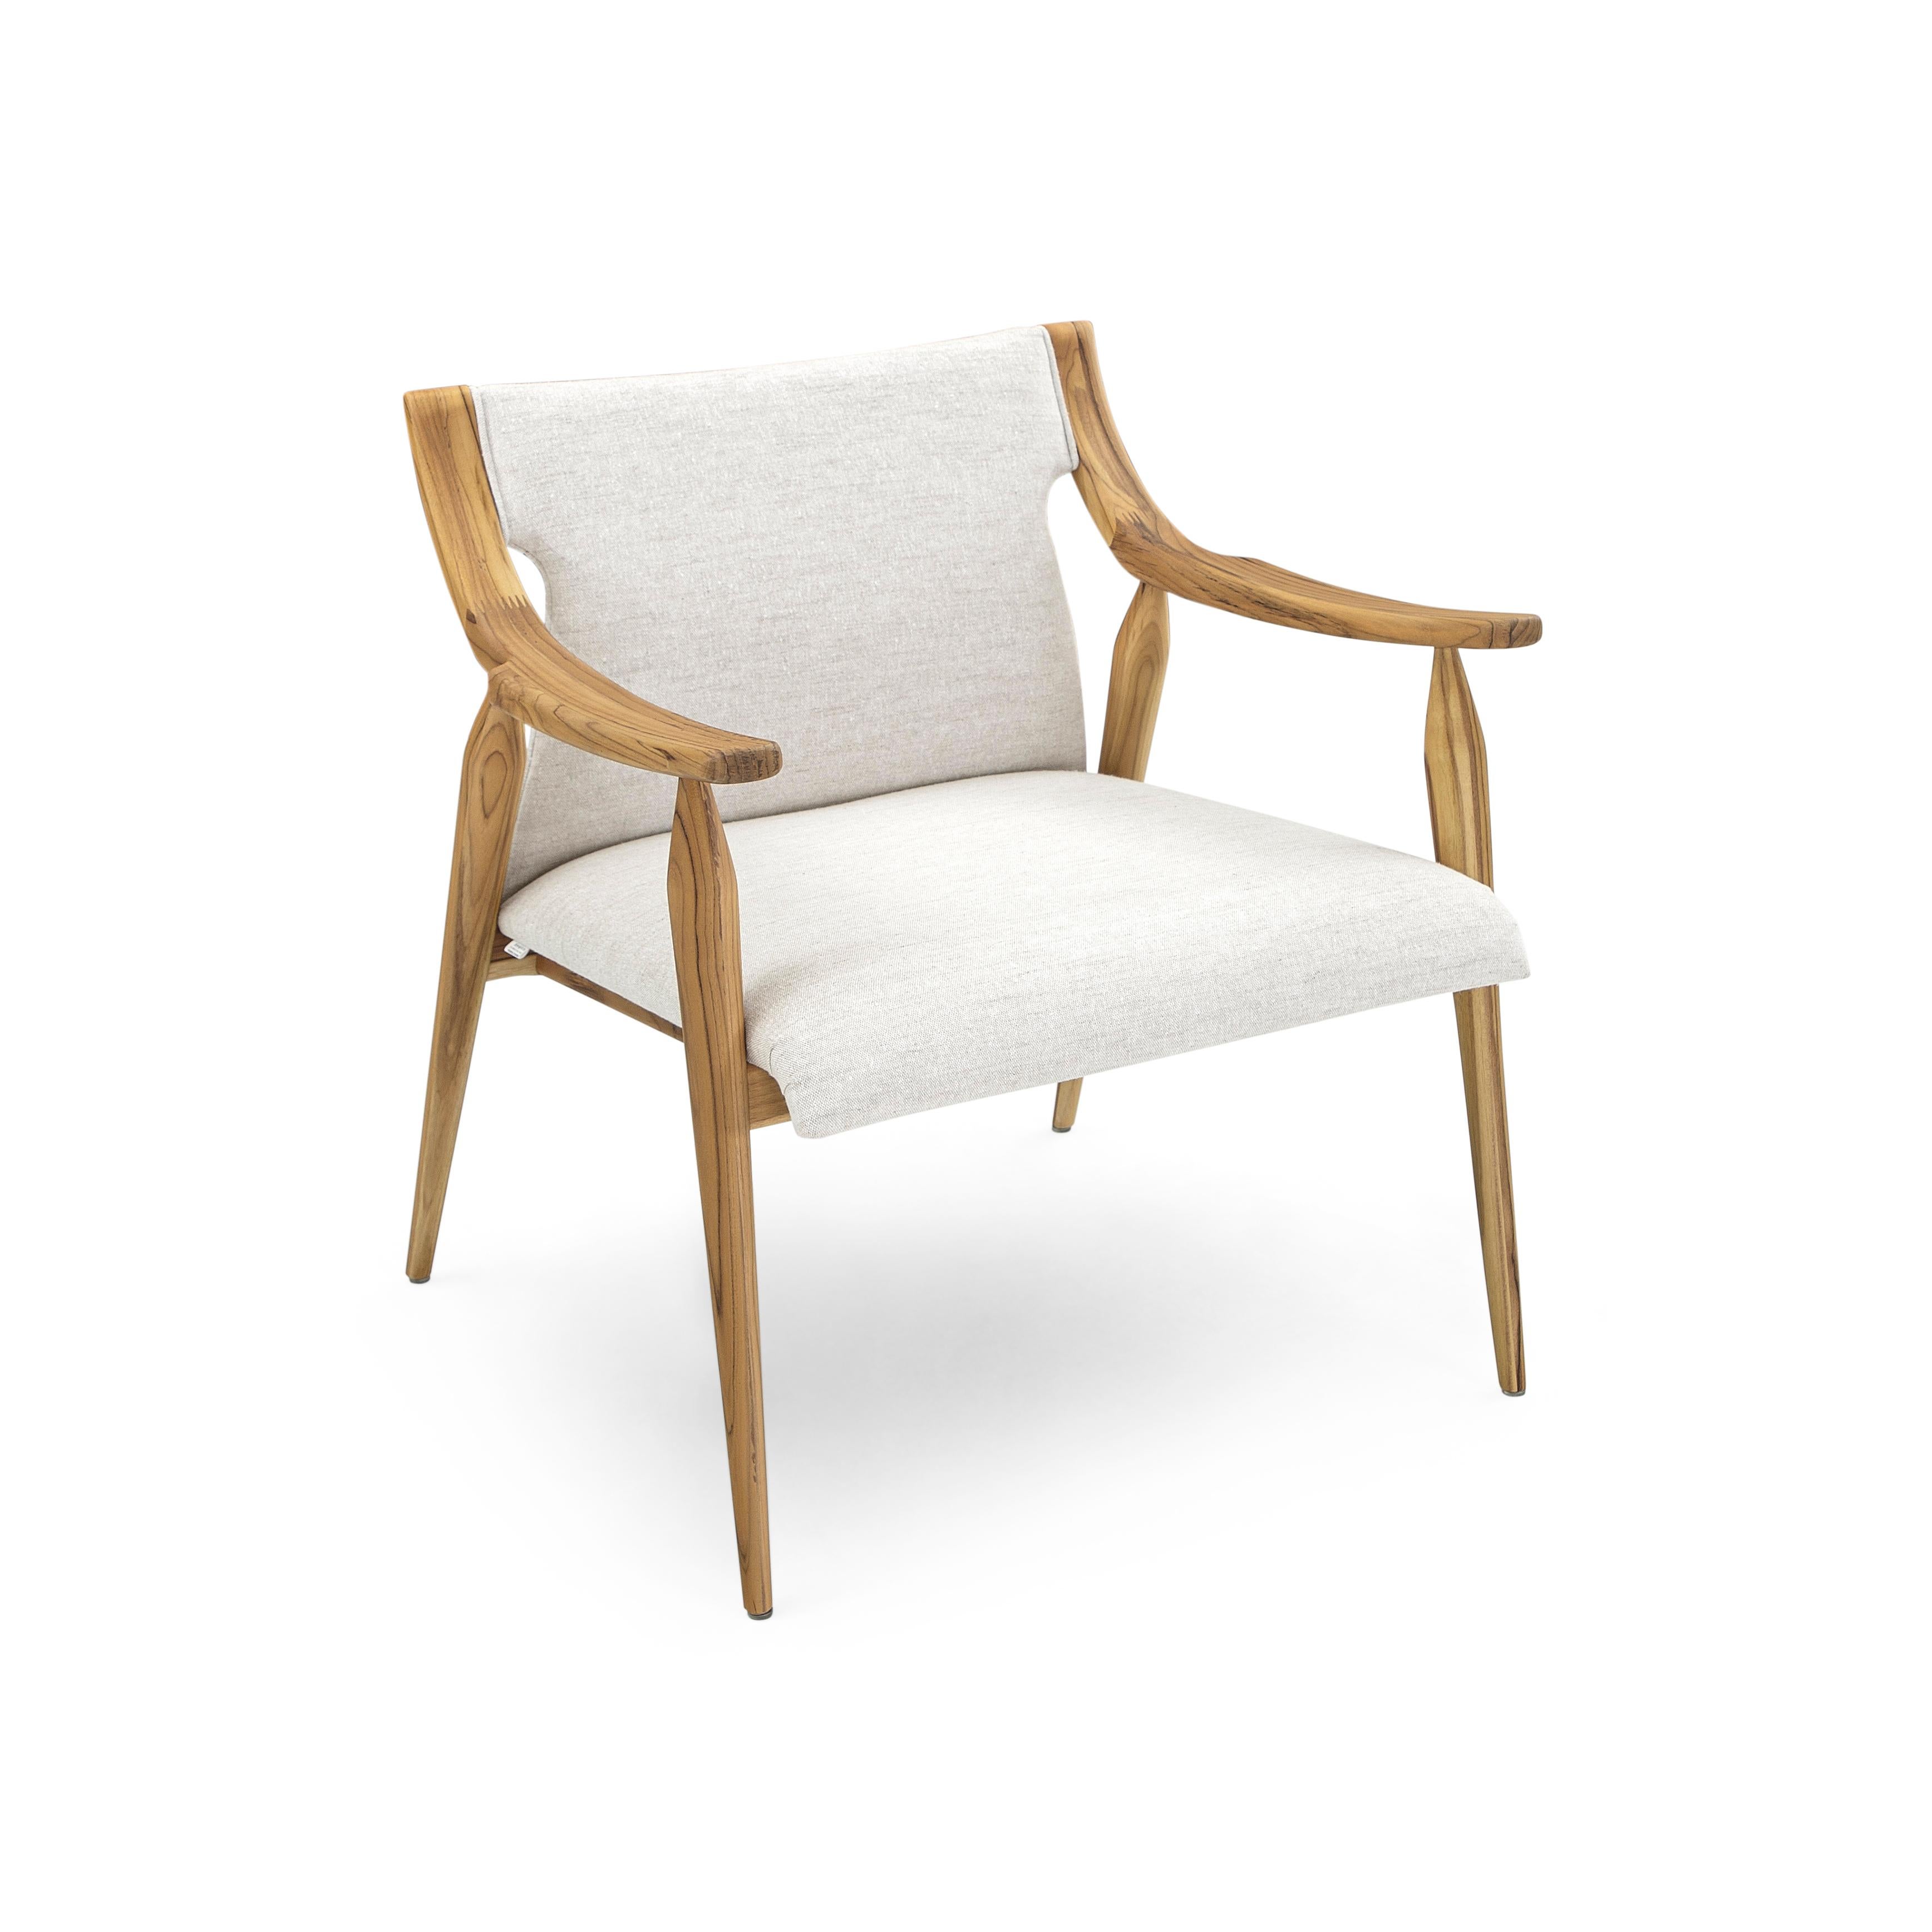 Contemporary Mince Armchair Featuring Curved Arms and Spindle Legs in Teak Wood Finish For Sale